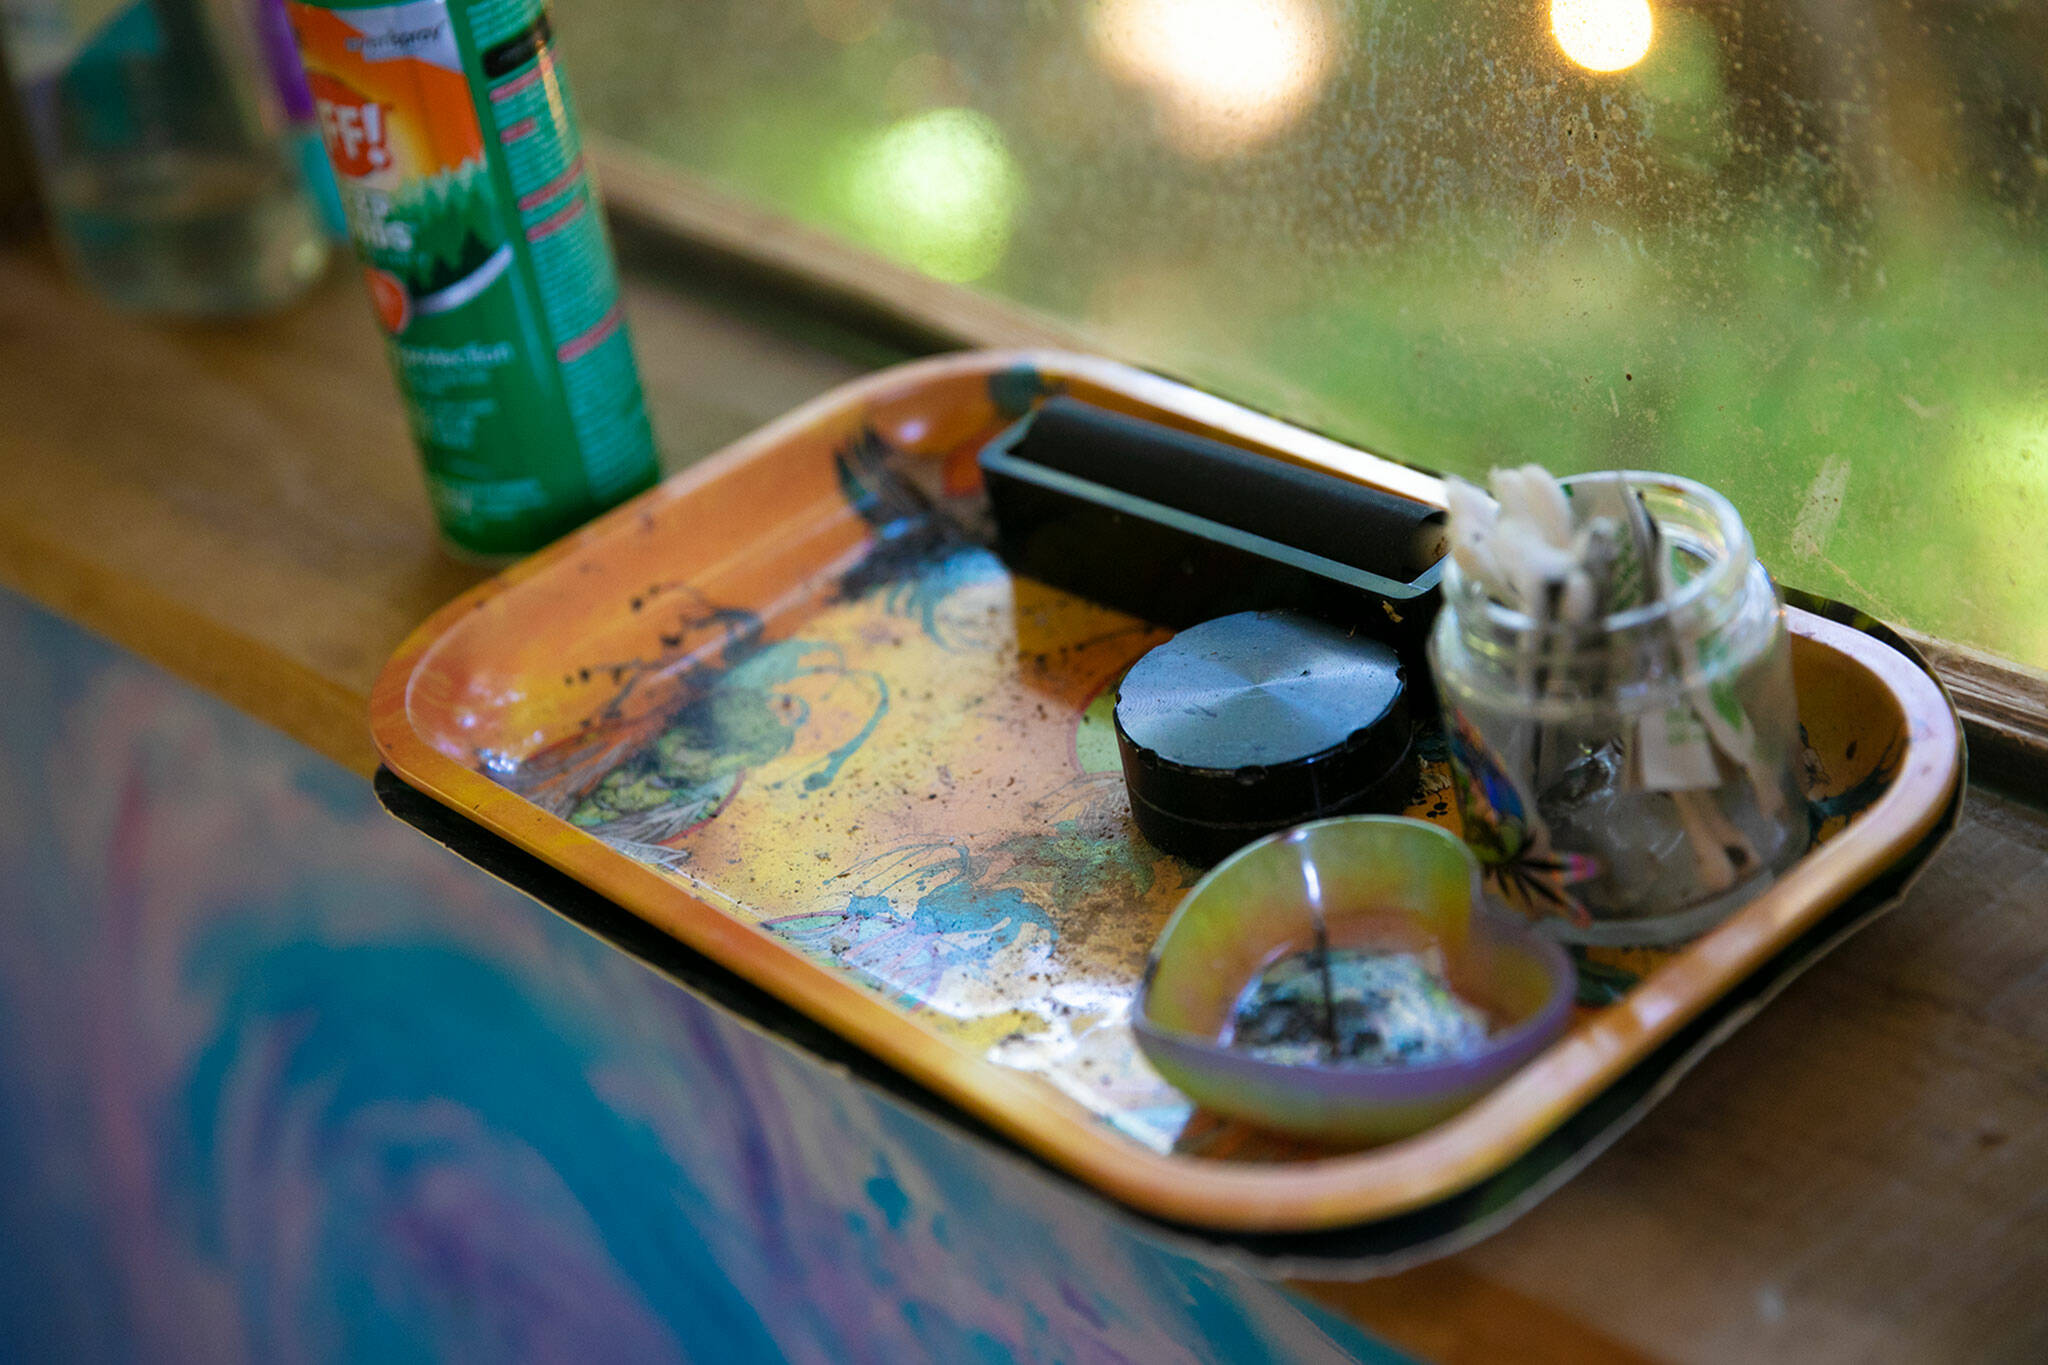 A rolling tray and other marijuana paraphernalia sit at the ready in one of the treehouses. (Ryan Berry / The Herald)